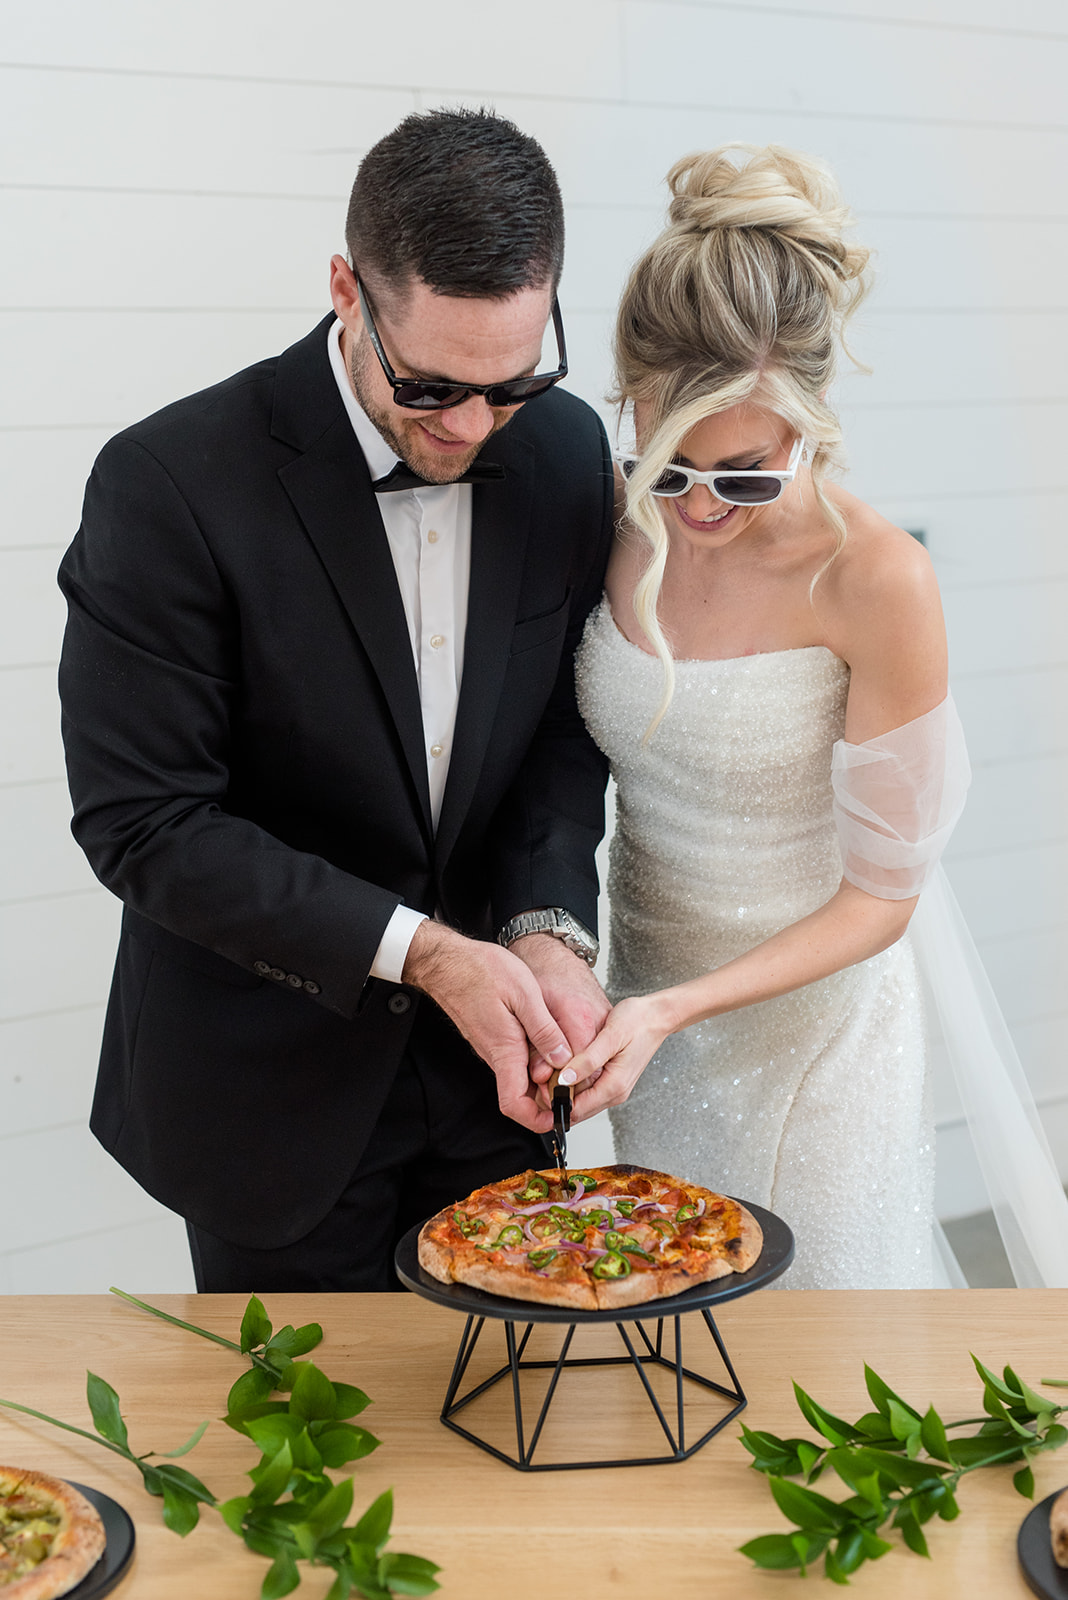 Bride and groom cut a pizza together at their wedding reception